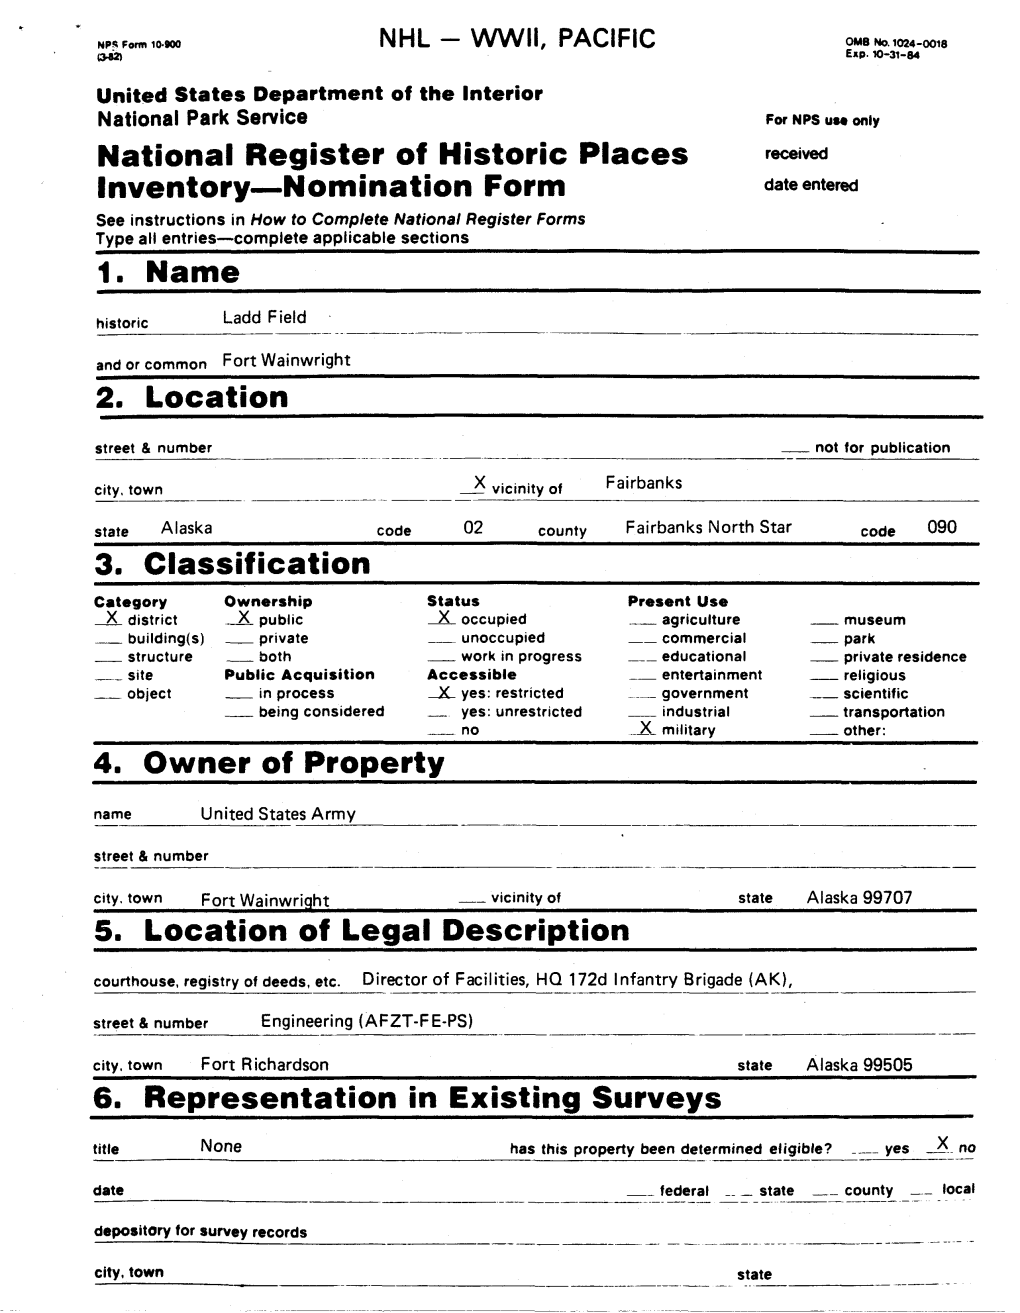 National Register of Historic Places Inventory—Nomination Form 1. Name 2. Location 4. Owner of Property 5. Location of Legal D